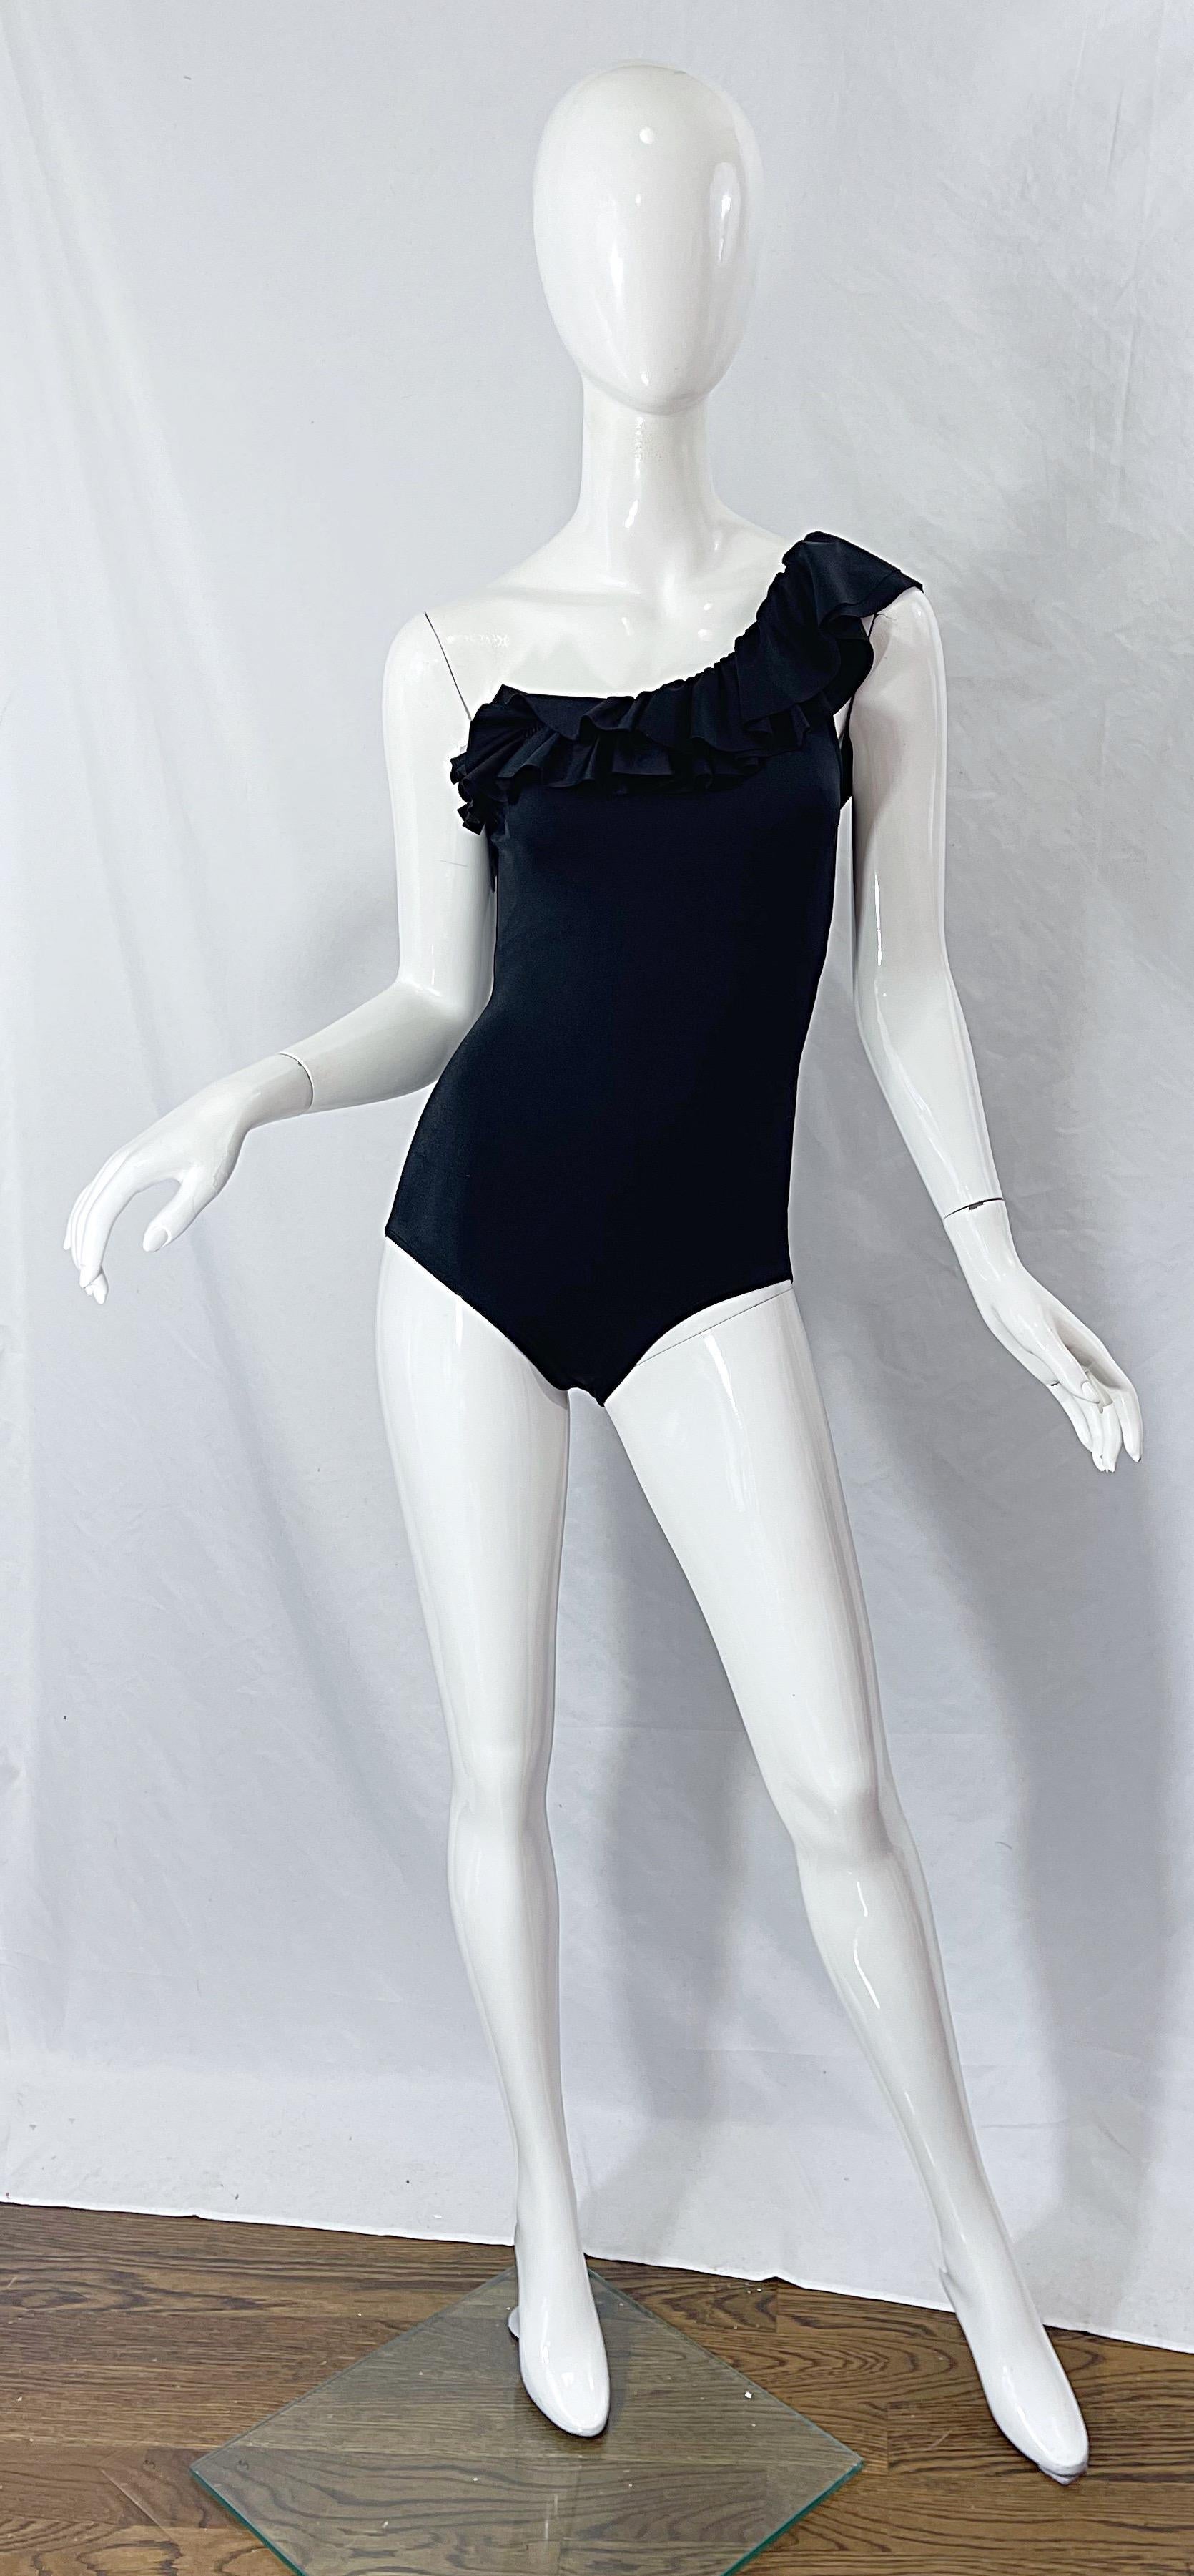 Flattering and chic deadstock ( never worn with original tags ) late 1980s vintage BILL BLASS one shoulder one piece swimsuit or bodysuit ! Features a flamenco style neckline with three layers of ruffles along the bust. Simply slips on and stretches